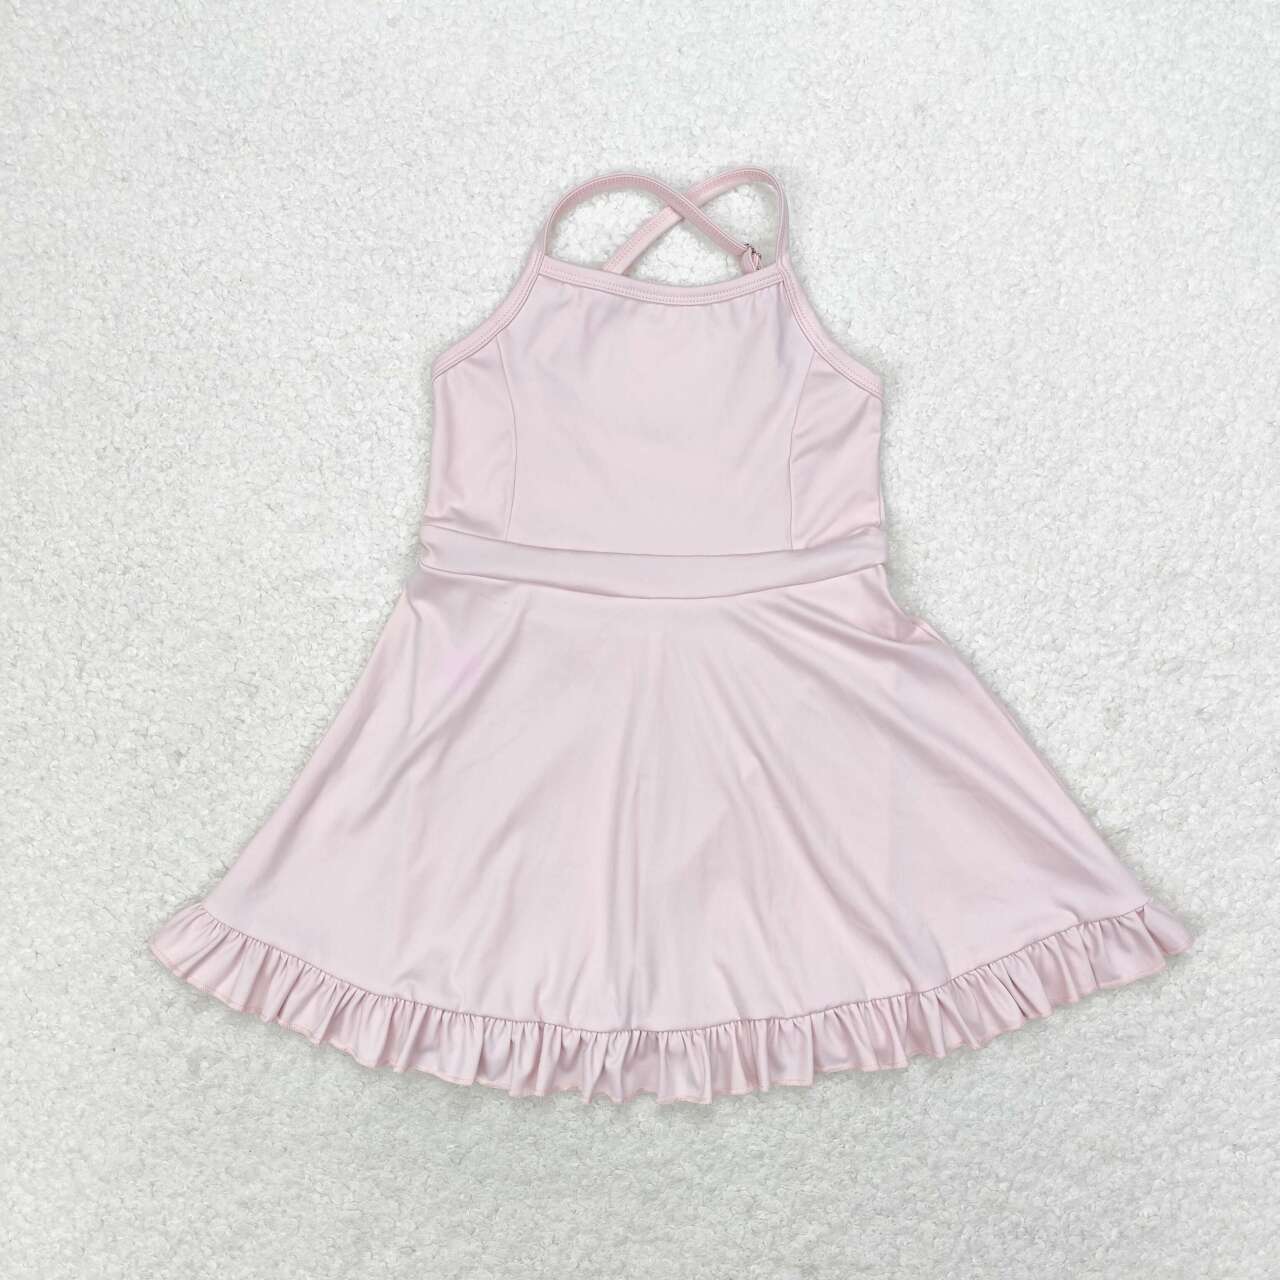 S0443 pink girls tennis clothes